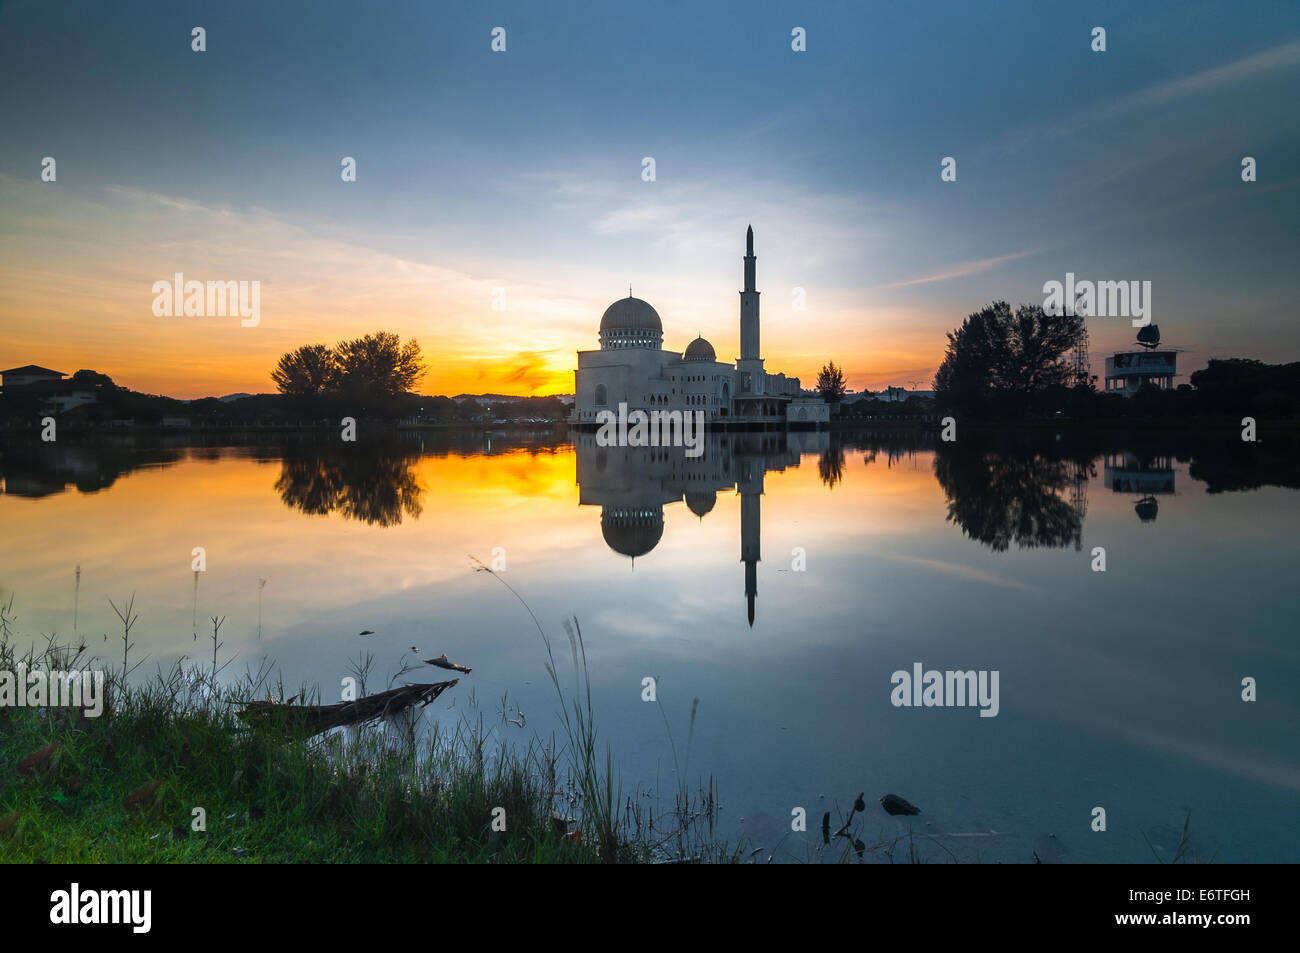 Sunrise at as-salam mosque Stock Photo